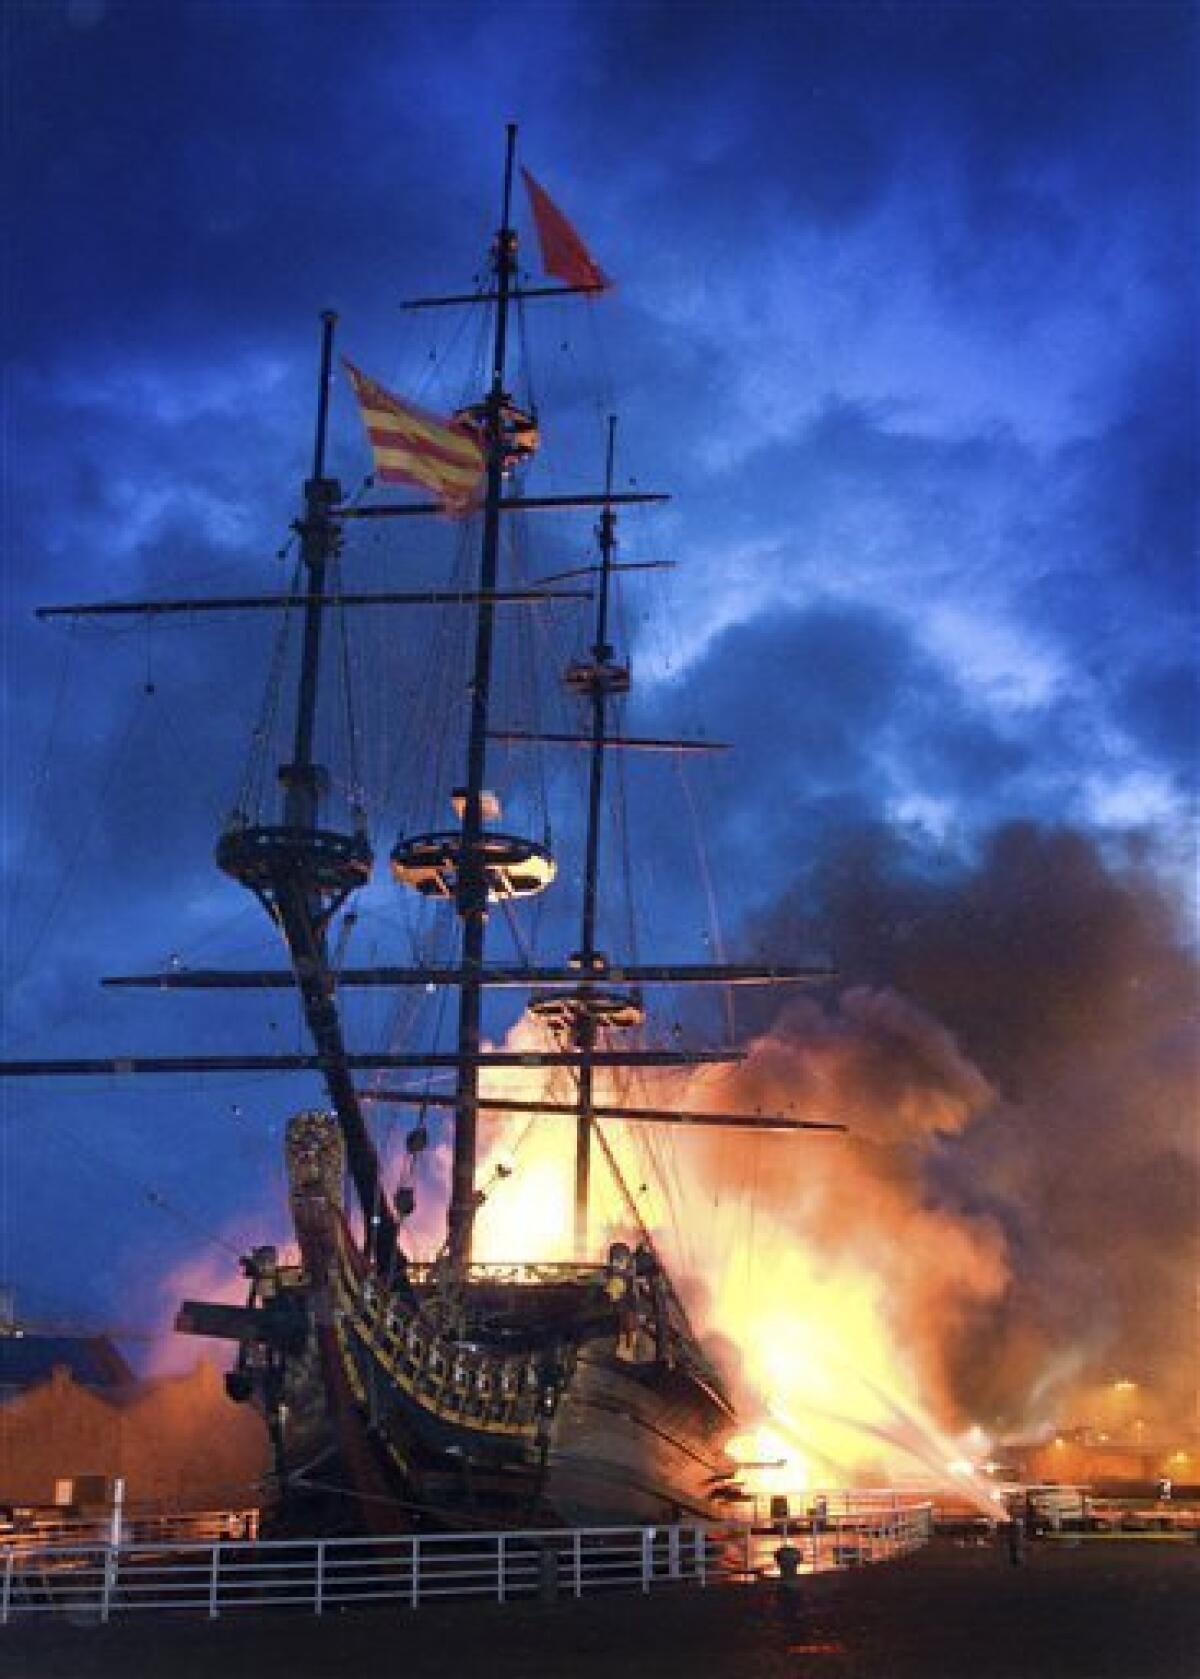 Flames consume a replica of the 17th-century flagship Prins Willem in Den Helder, northern Netherlands, early Thursday, July 30, 2009. Fire has destroyed a replica of the 17th-century flagship of the Dutch East India Company. The three-mast tall ship, which was built in the 1980s, was moored at Holland Village in Nagasaki, Japan, for many years before it returned to the northern Dutch port of Den Helder in 2003. (AP Photo/ Peter van Aalst/ Berber van Beek)